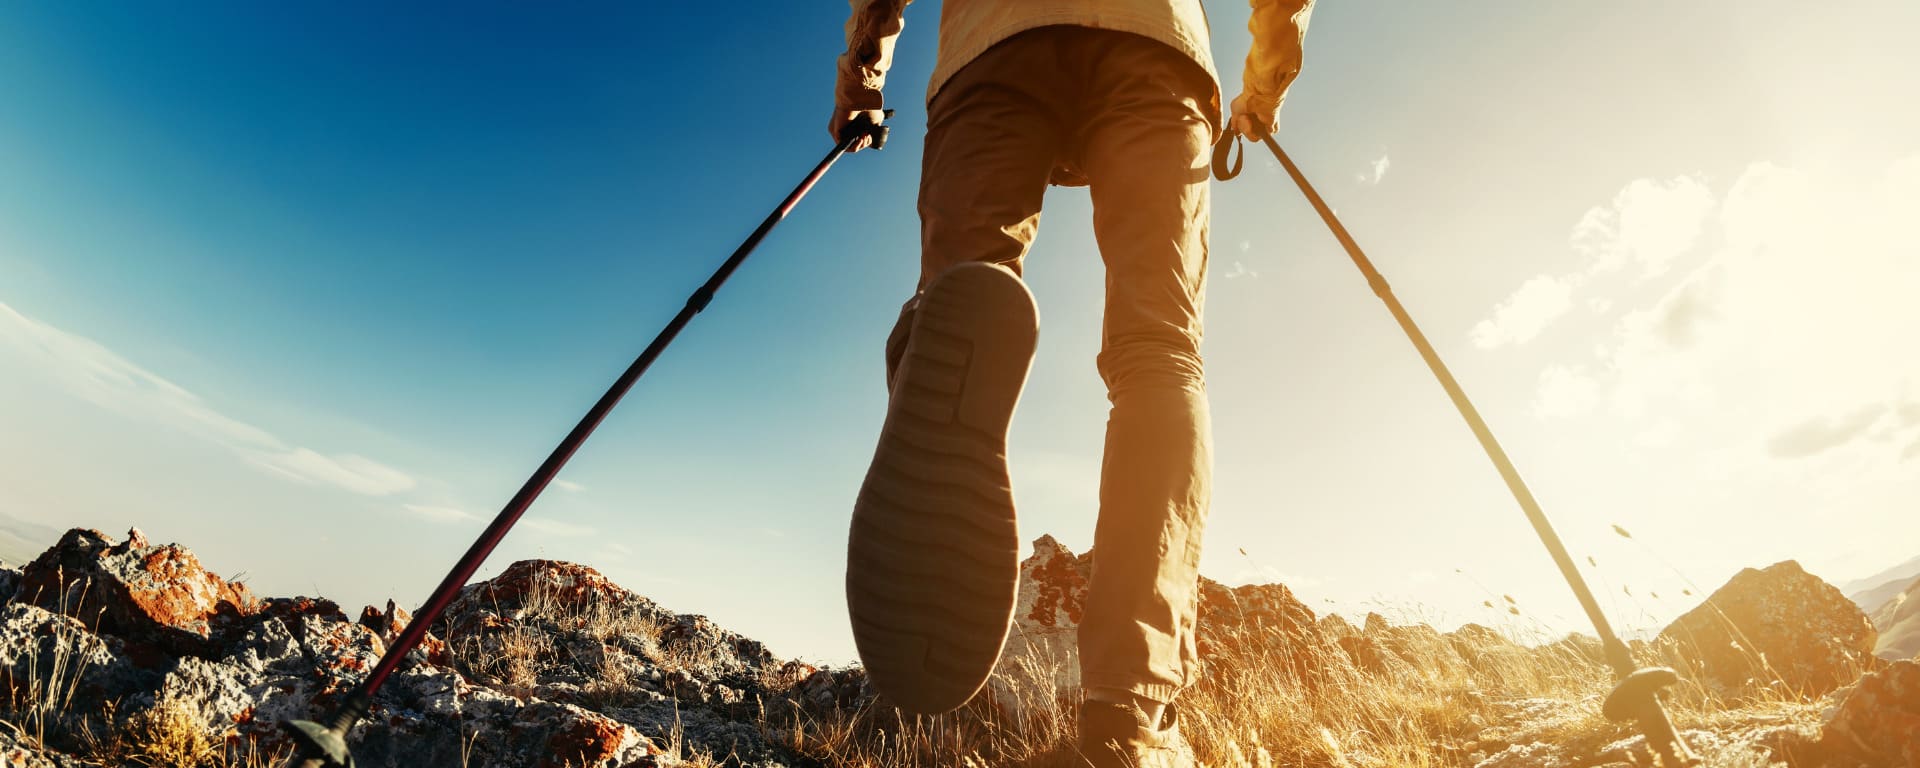 Best Hiking Poles - Feature Image